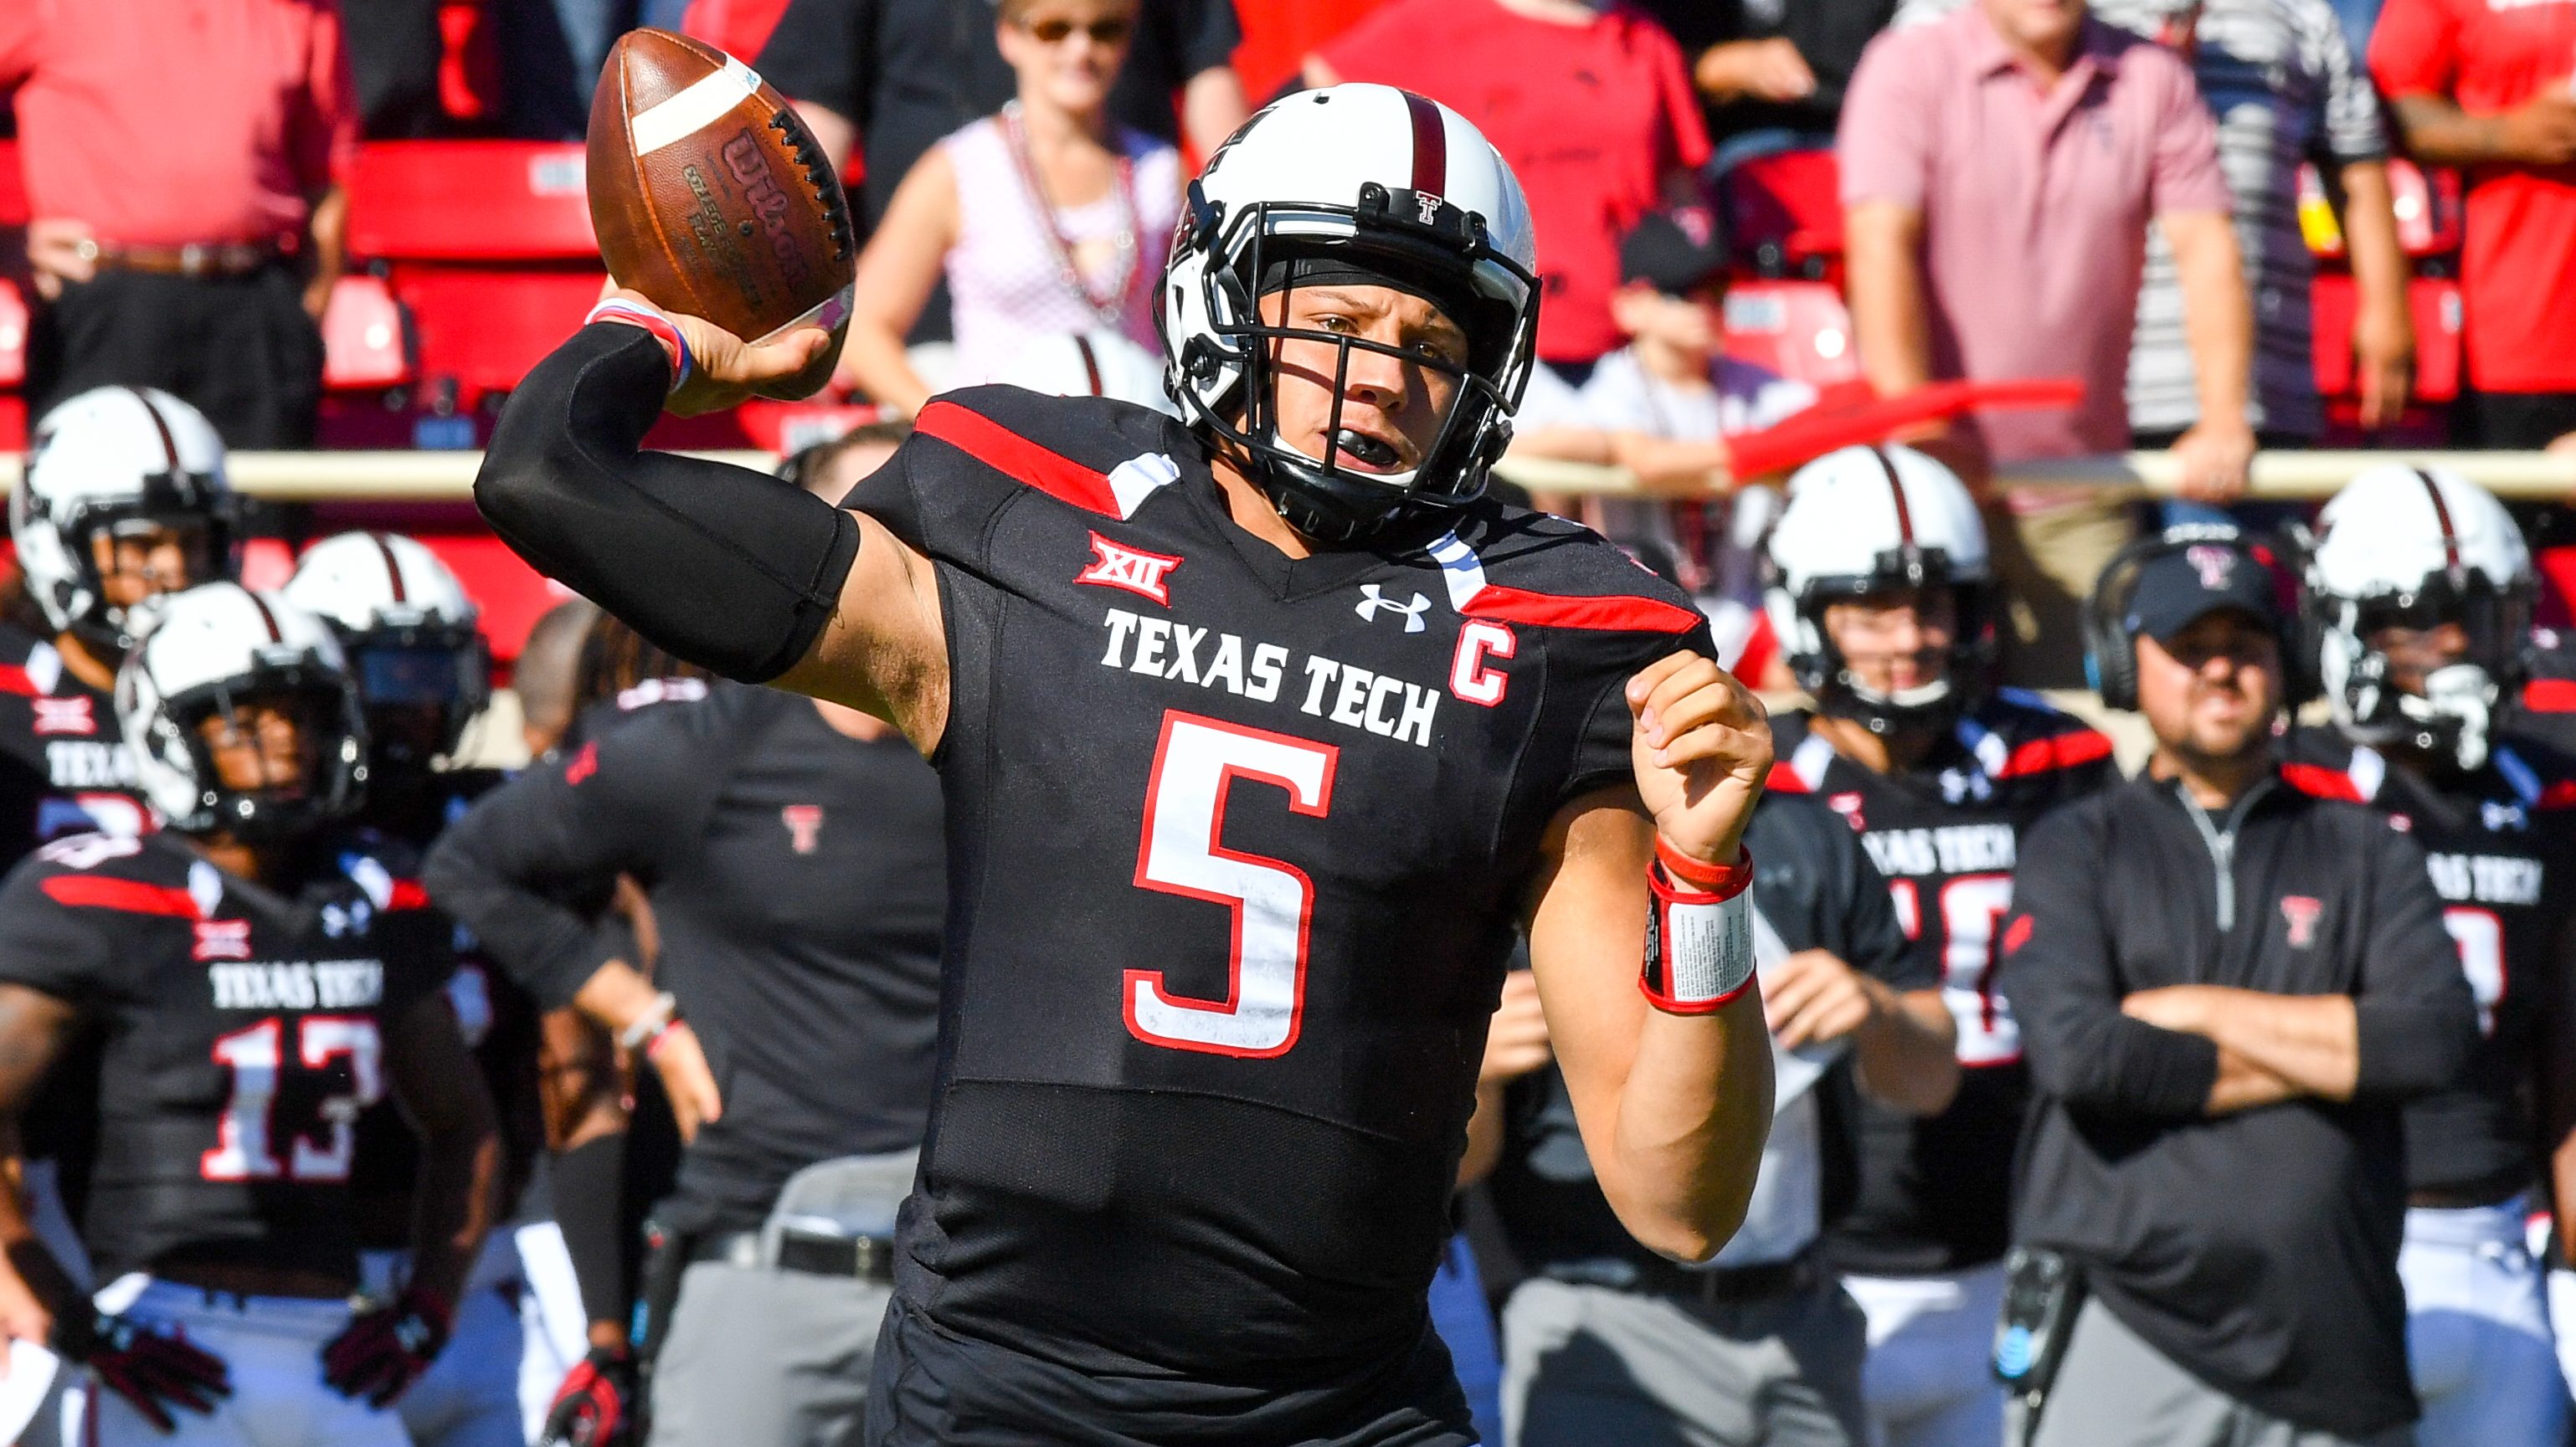 Where Did Patrick Mahomes Grow Up and Go to College?